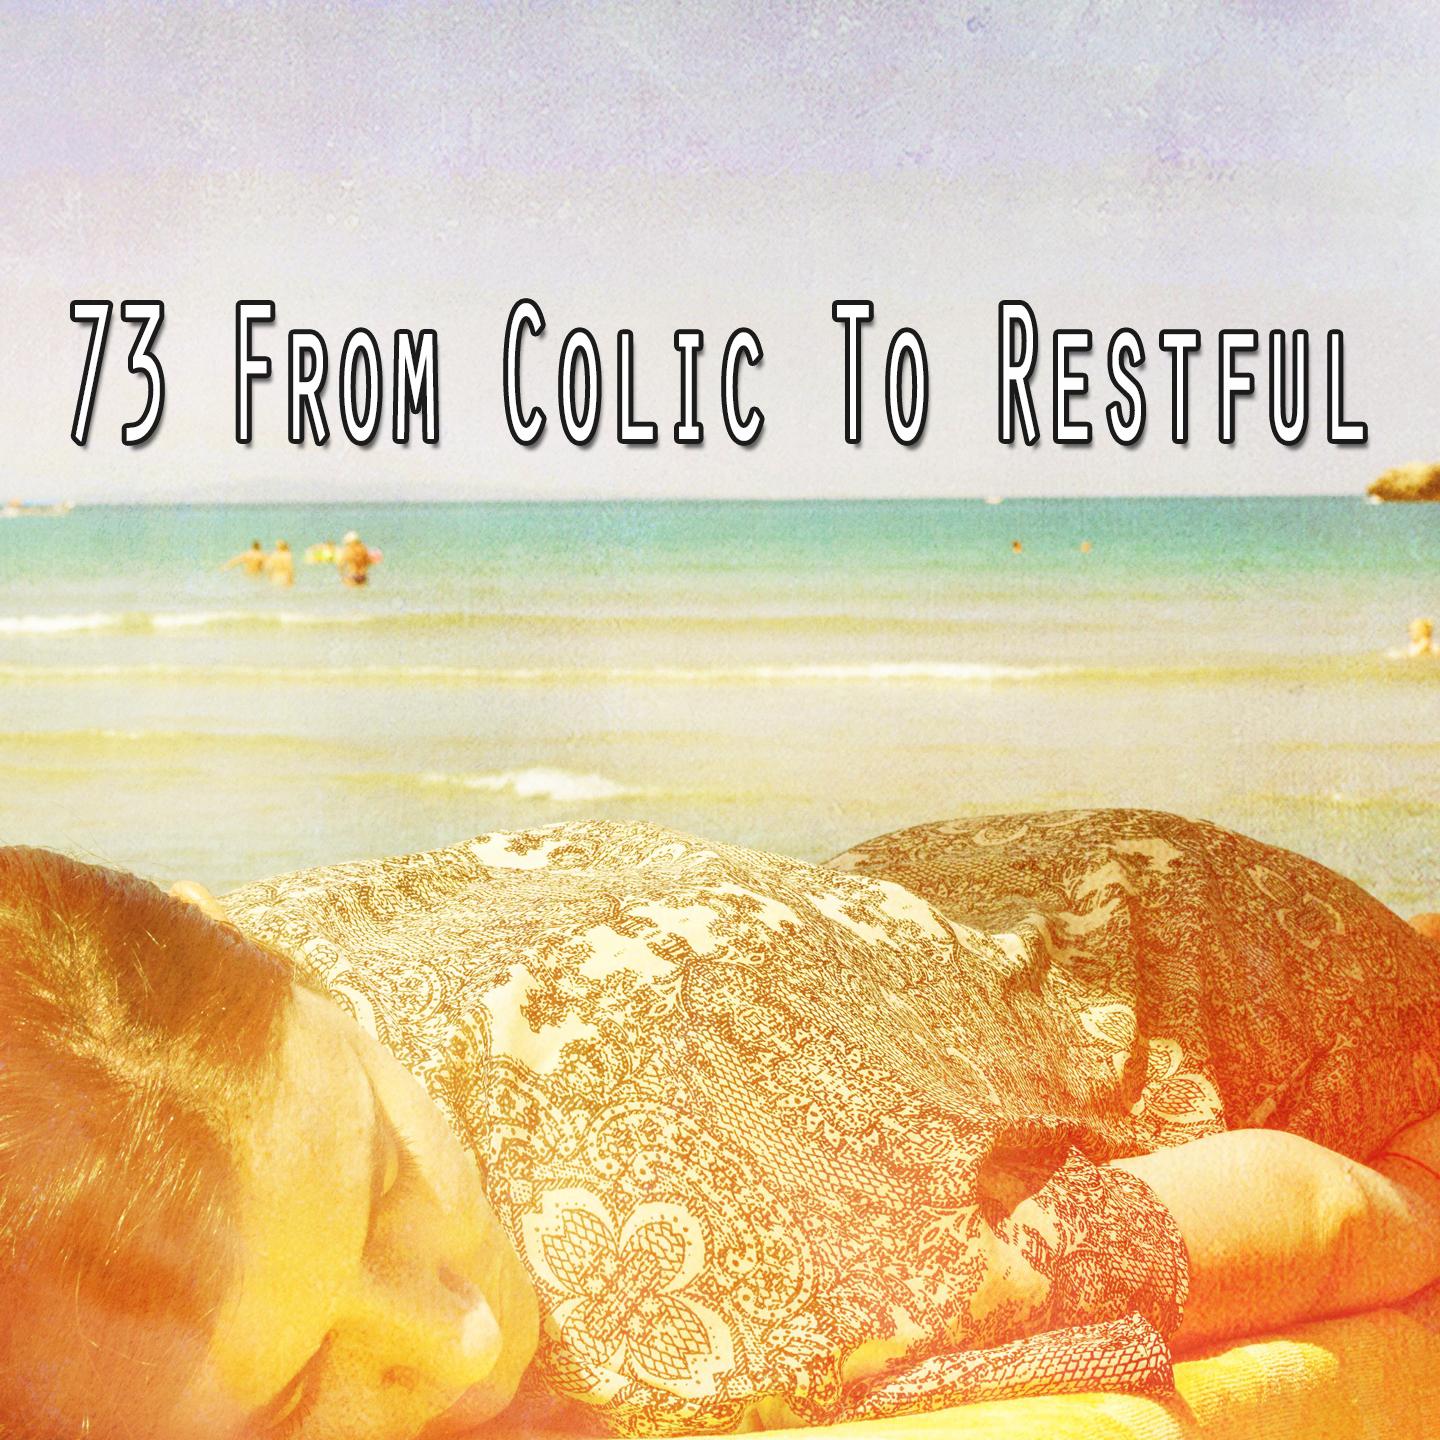 73 From Colic to Restful